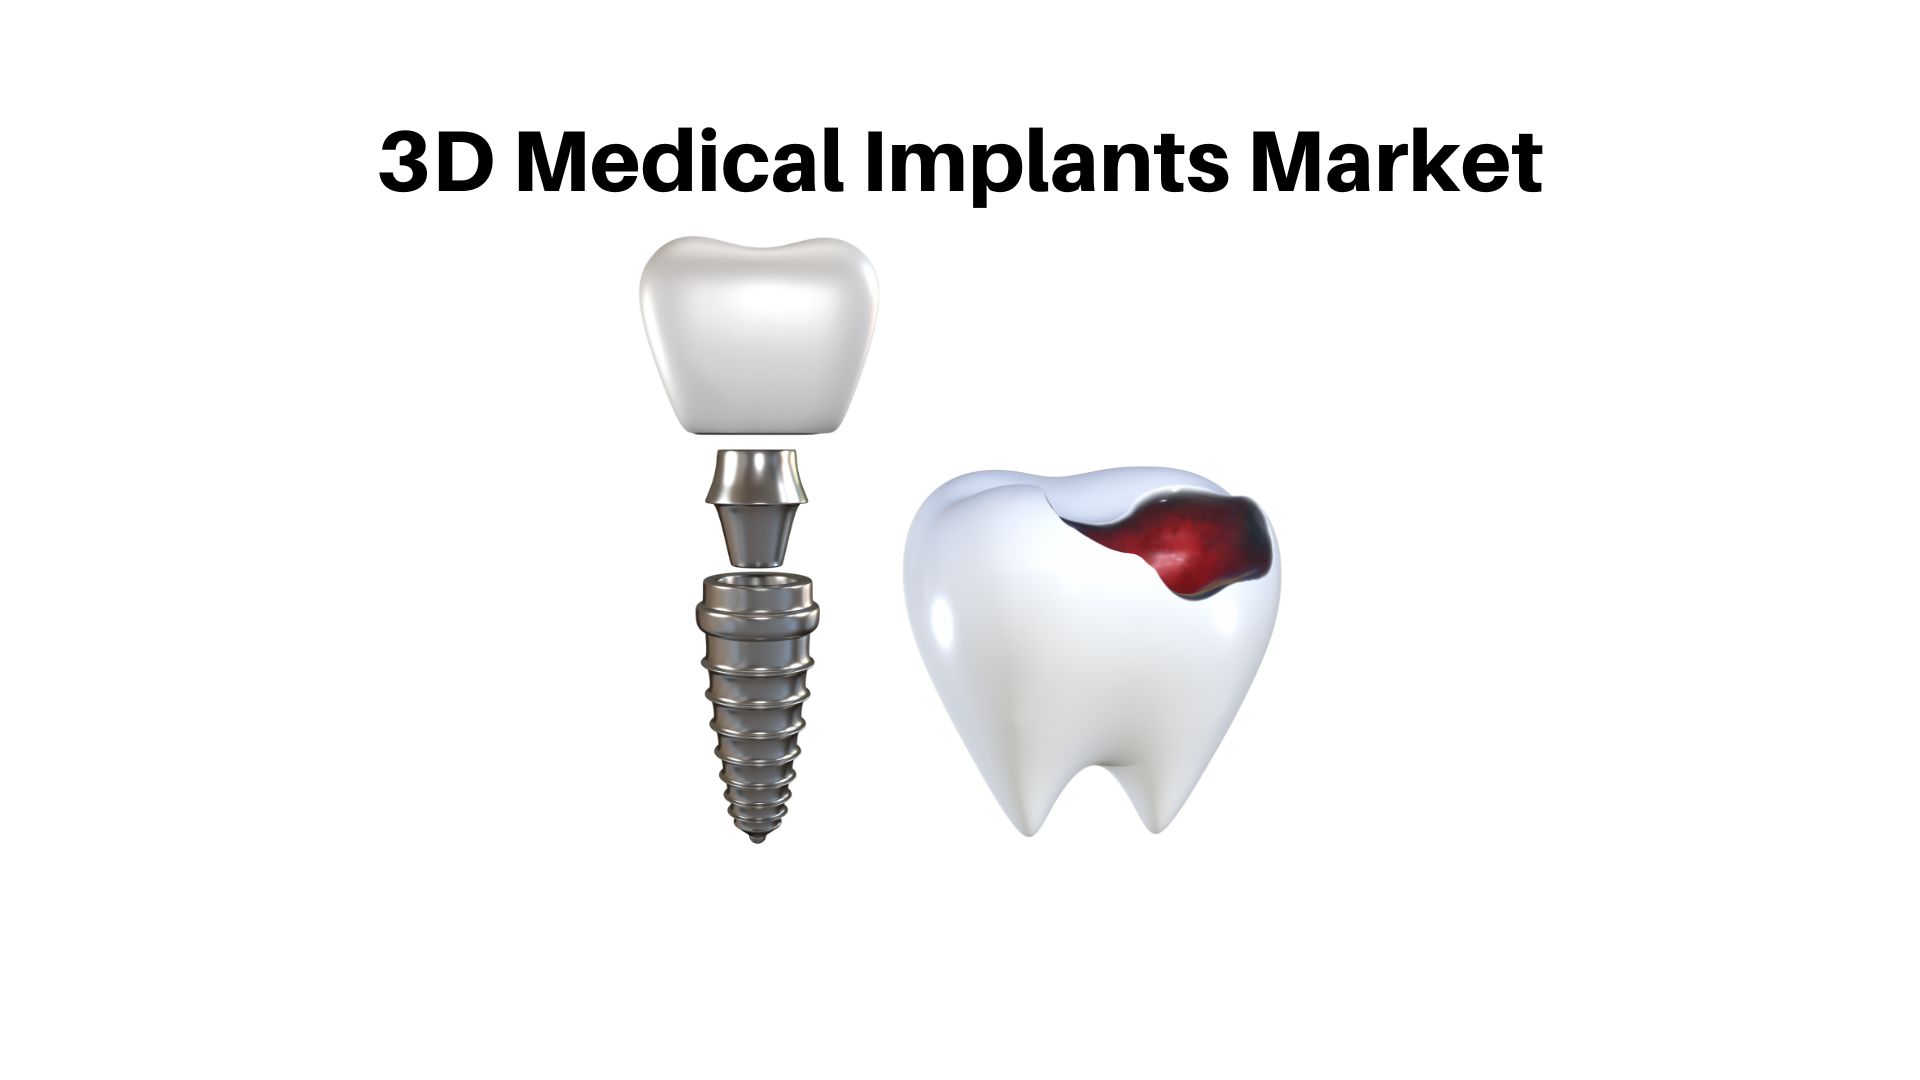 3D Medical Implants Market Size USD 8.8 bn | Vendors Analysis (Ingenico, Verifone) By 2032